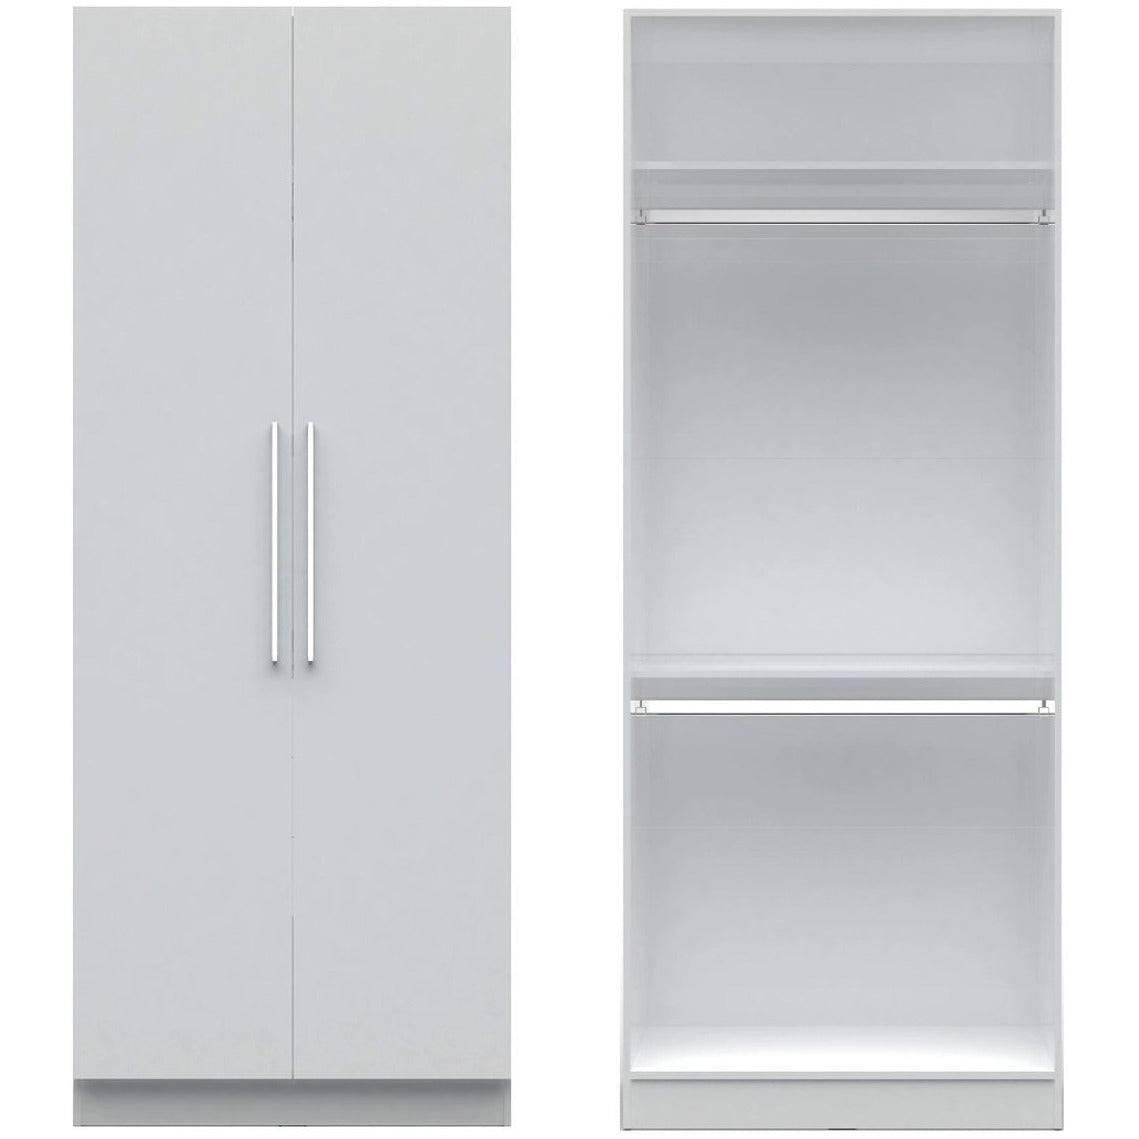 Manhattan Comfort Chelsea 2.0 - 35.43 inch Wide Double Hanging Closet with 2 Doors in White-Minimal & Modern